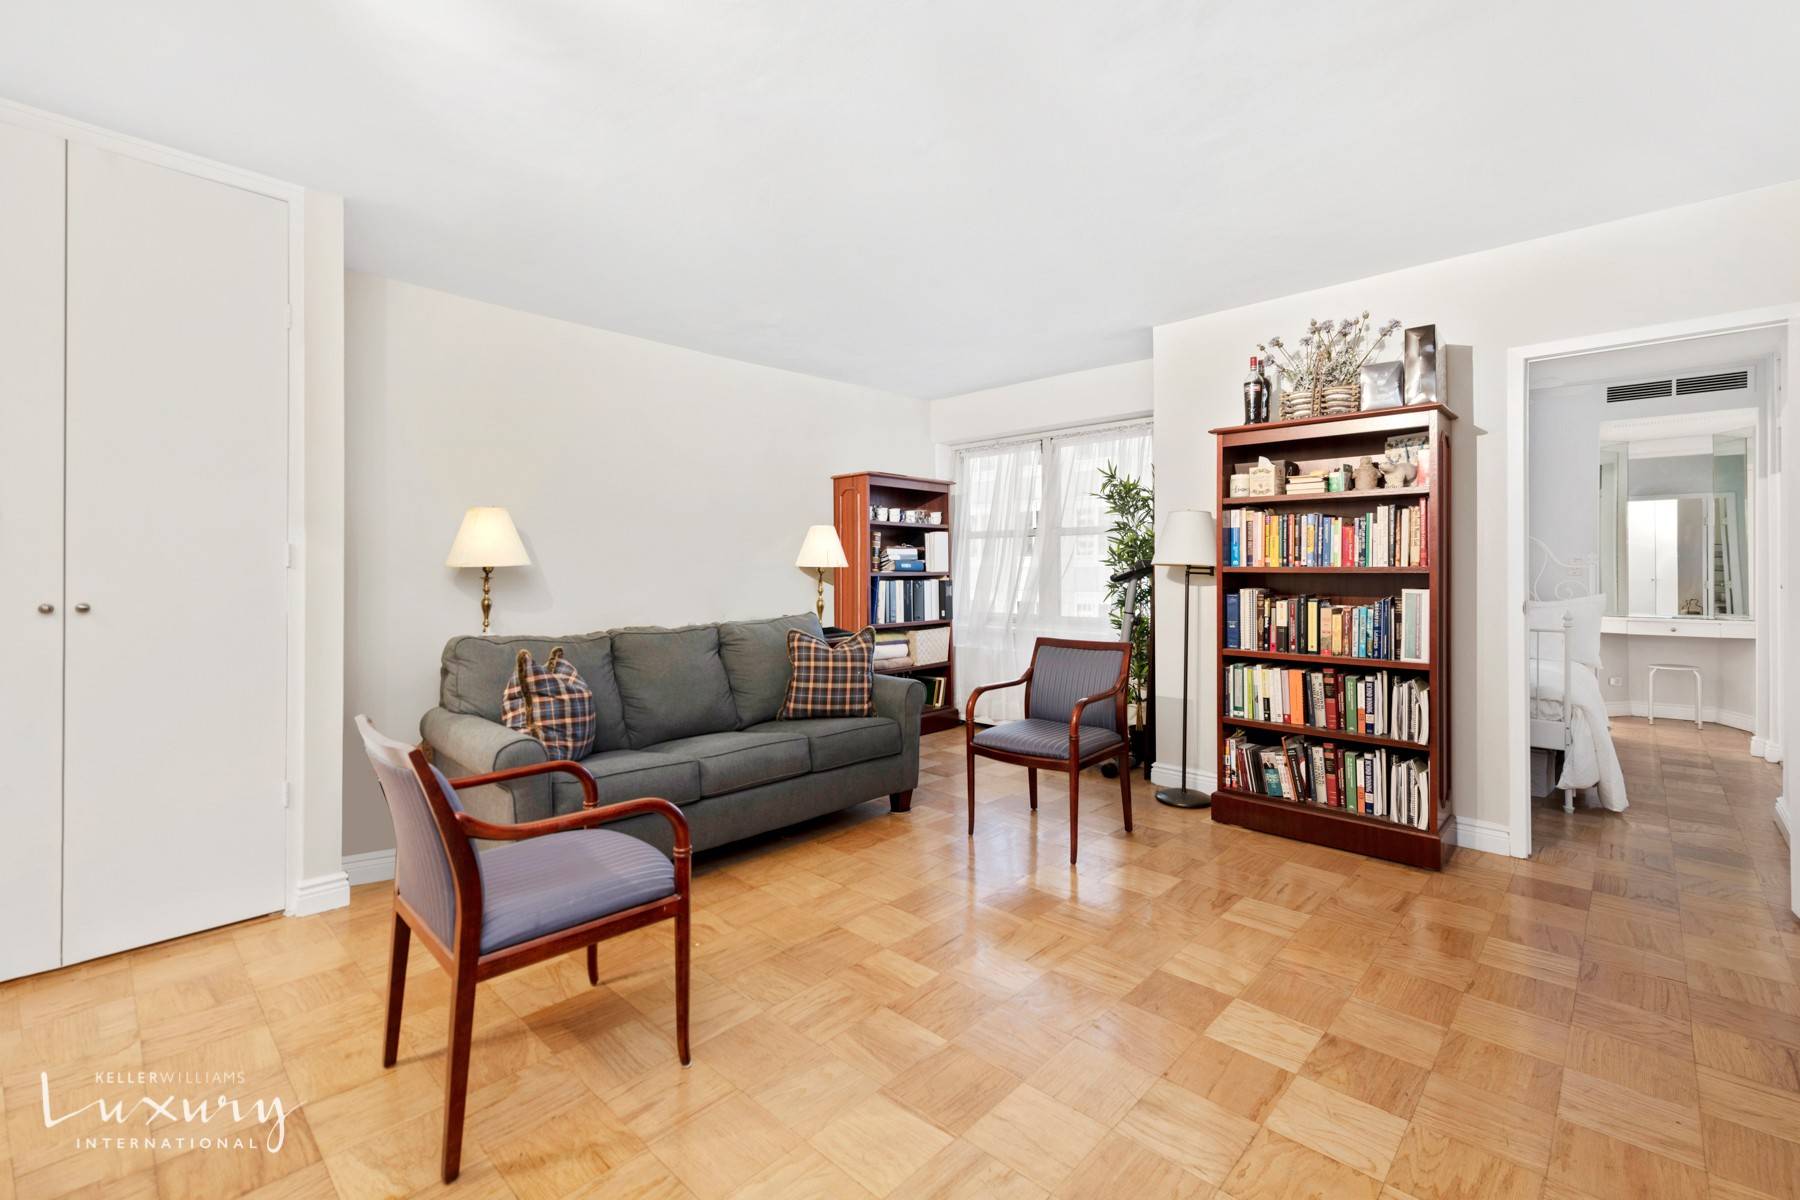 Be the first to see this spacious alcove studio already converted to a perfectly charming Jr.